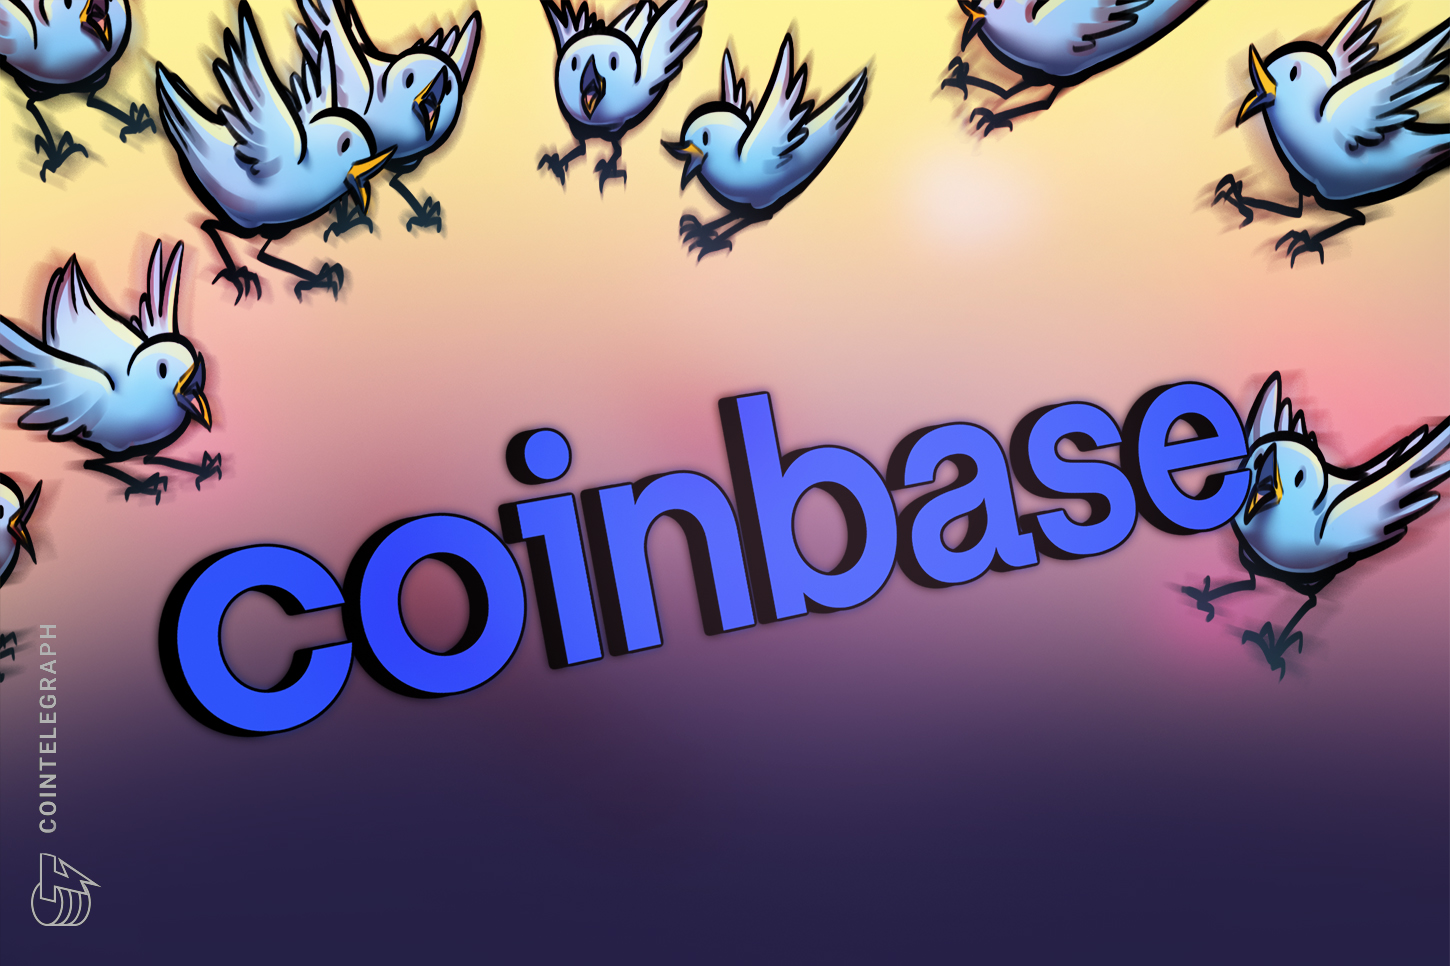 Armstrong-tweets-in-public-airing-of-coinbase’s-internal-discontent